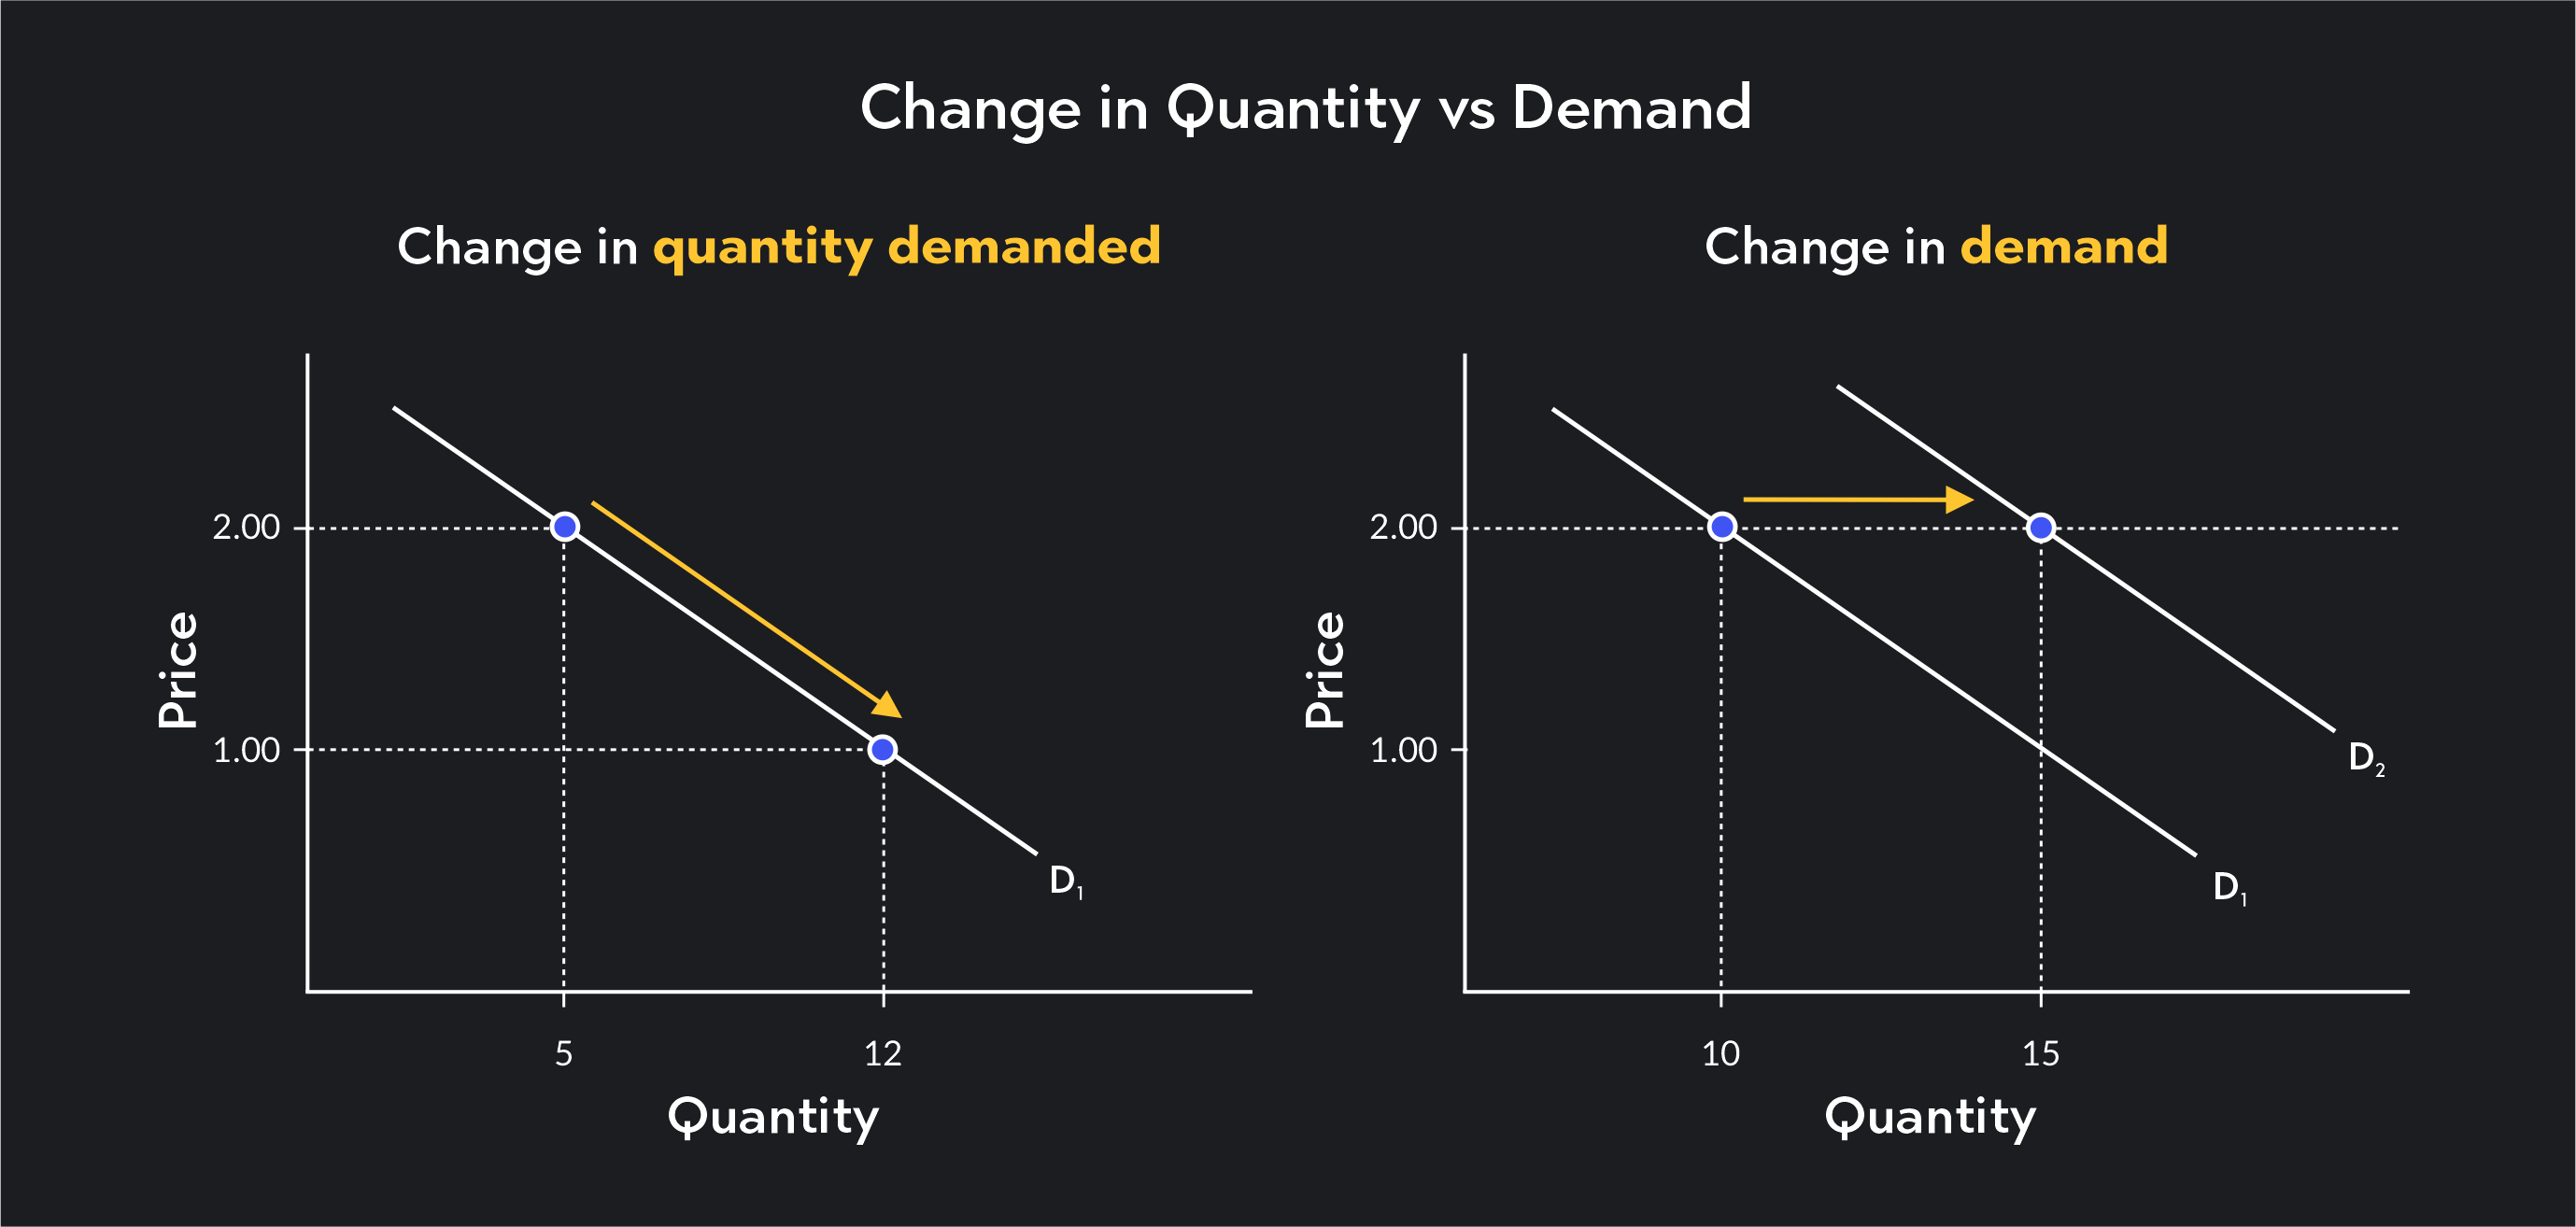 Graph showing change in quantity demanded vs change in demand